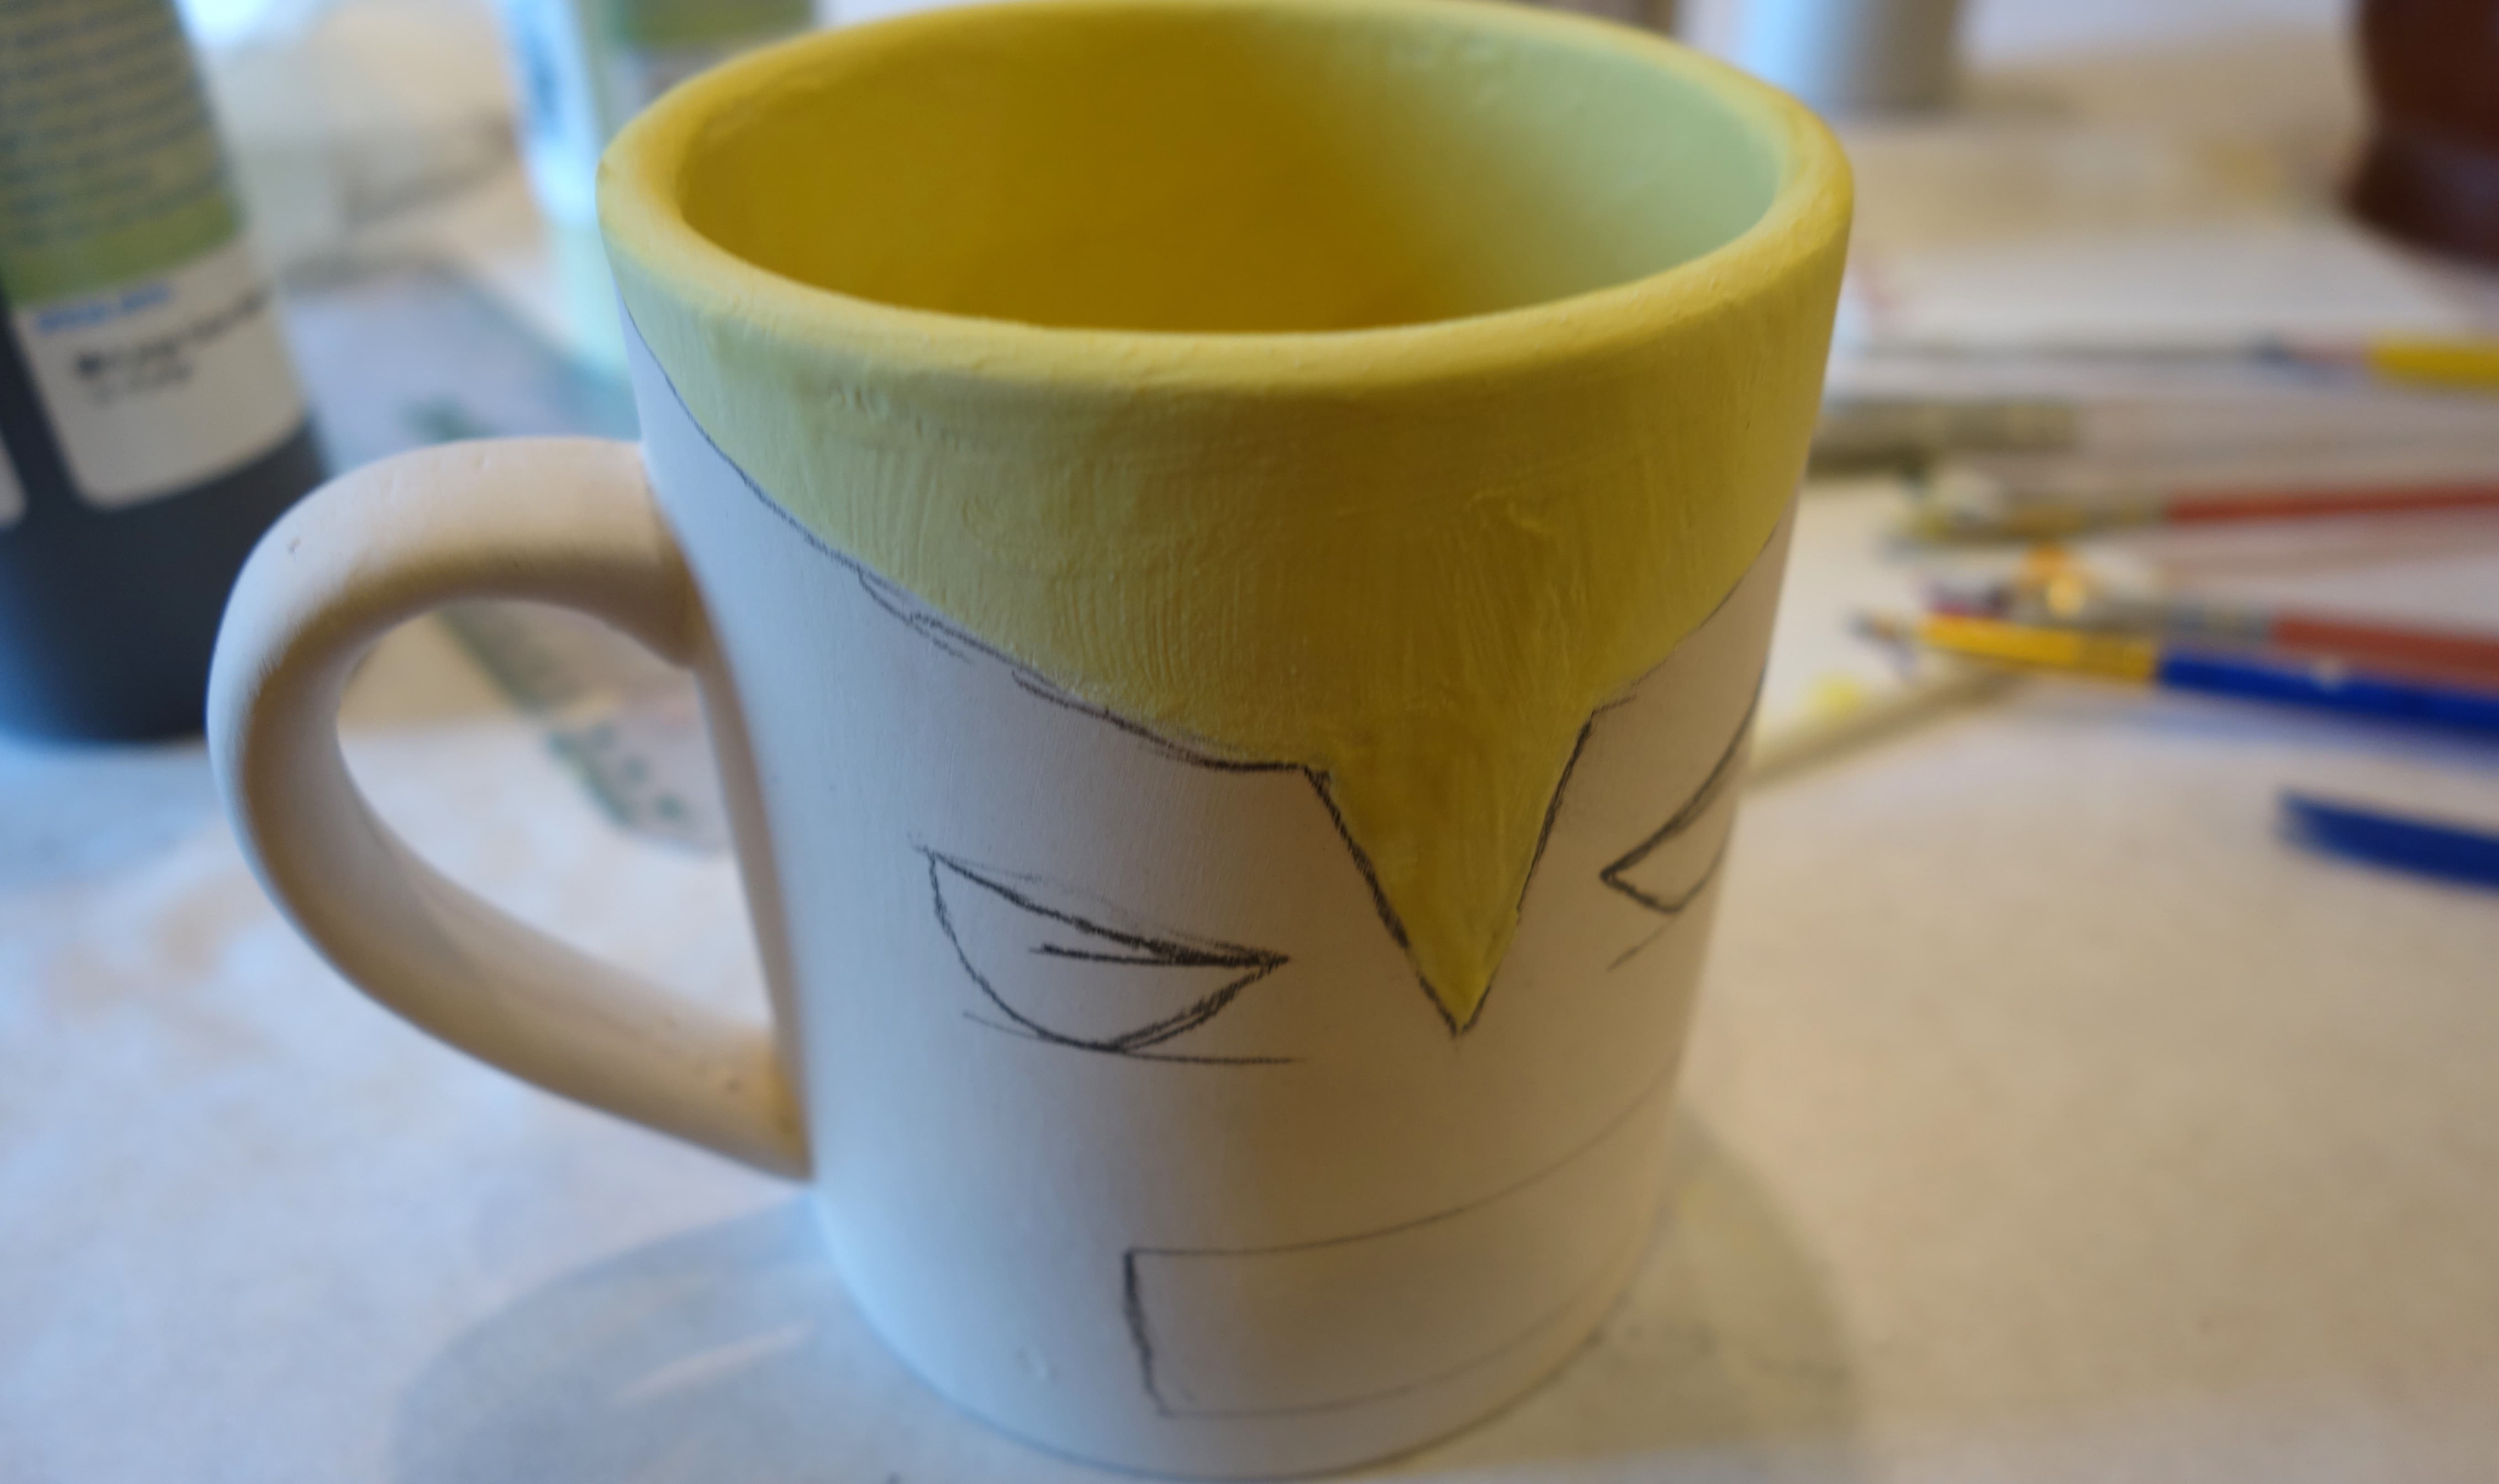 DIY Wolverine Mug Craft - Begin with the yellow paint on the outside of the mask